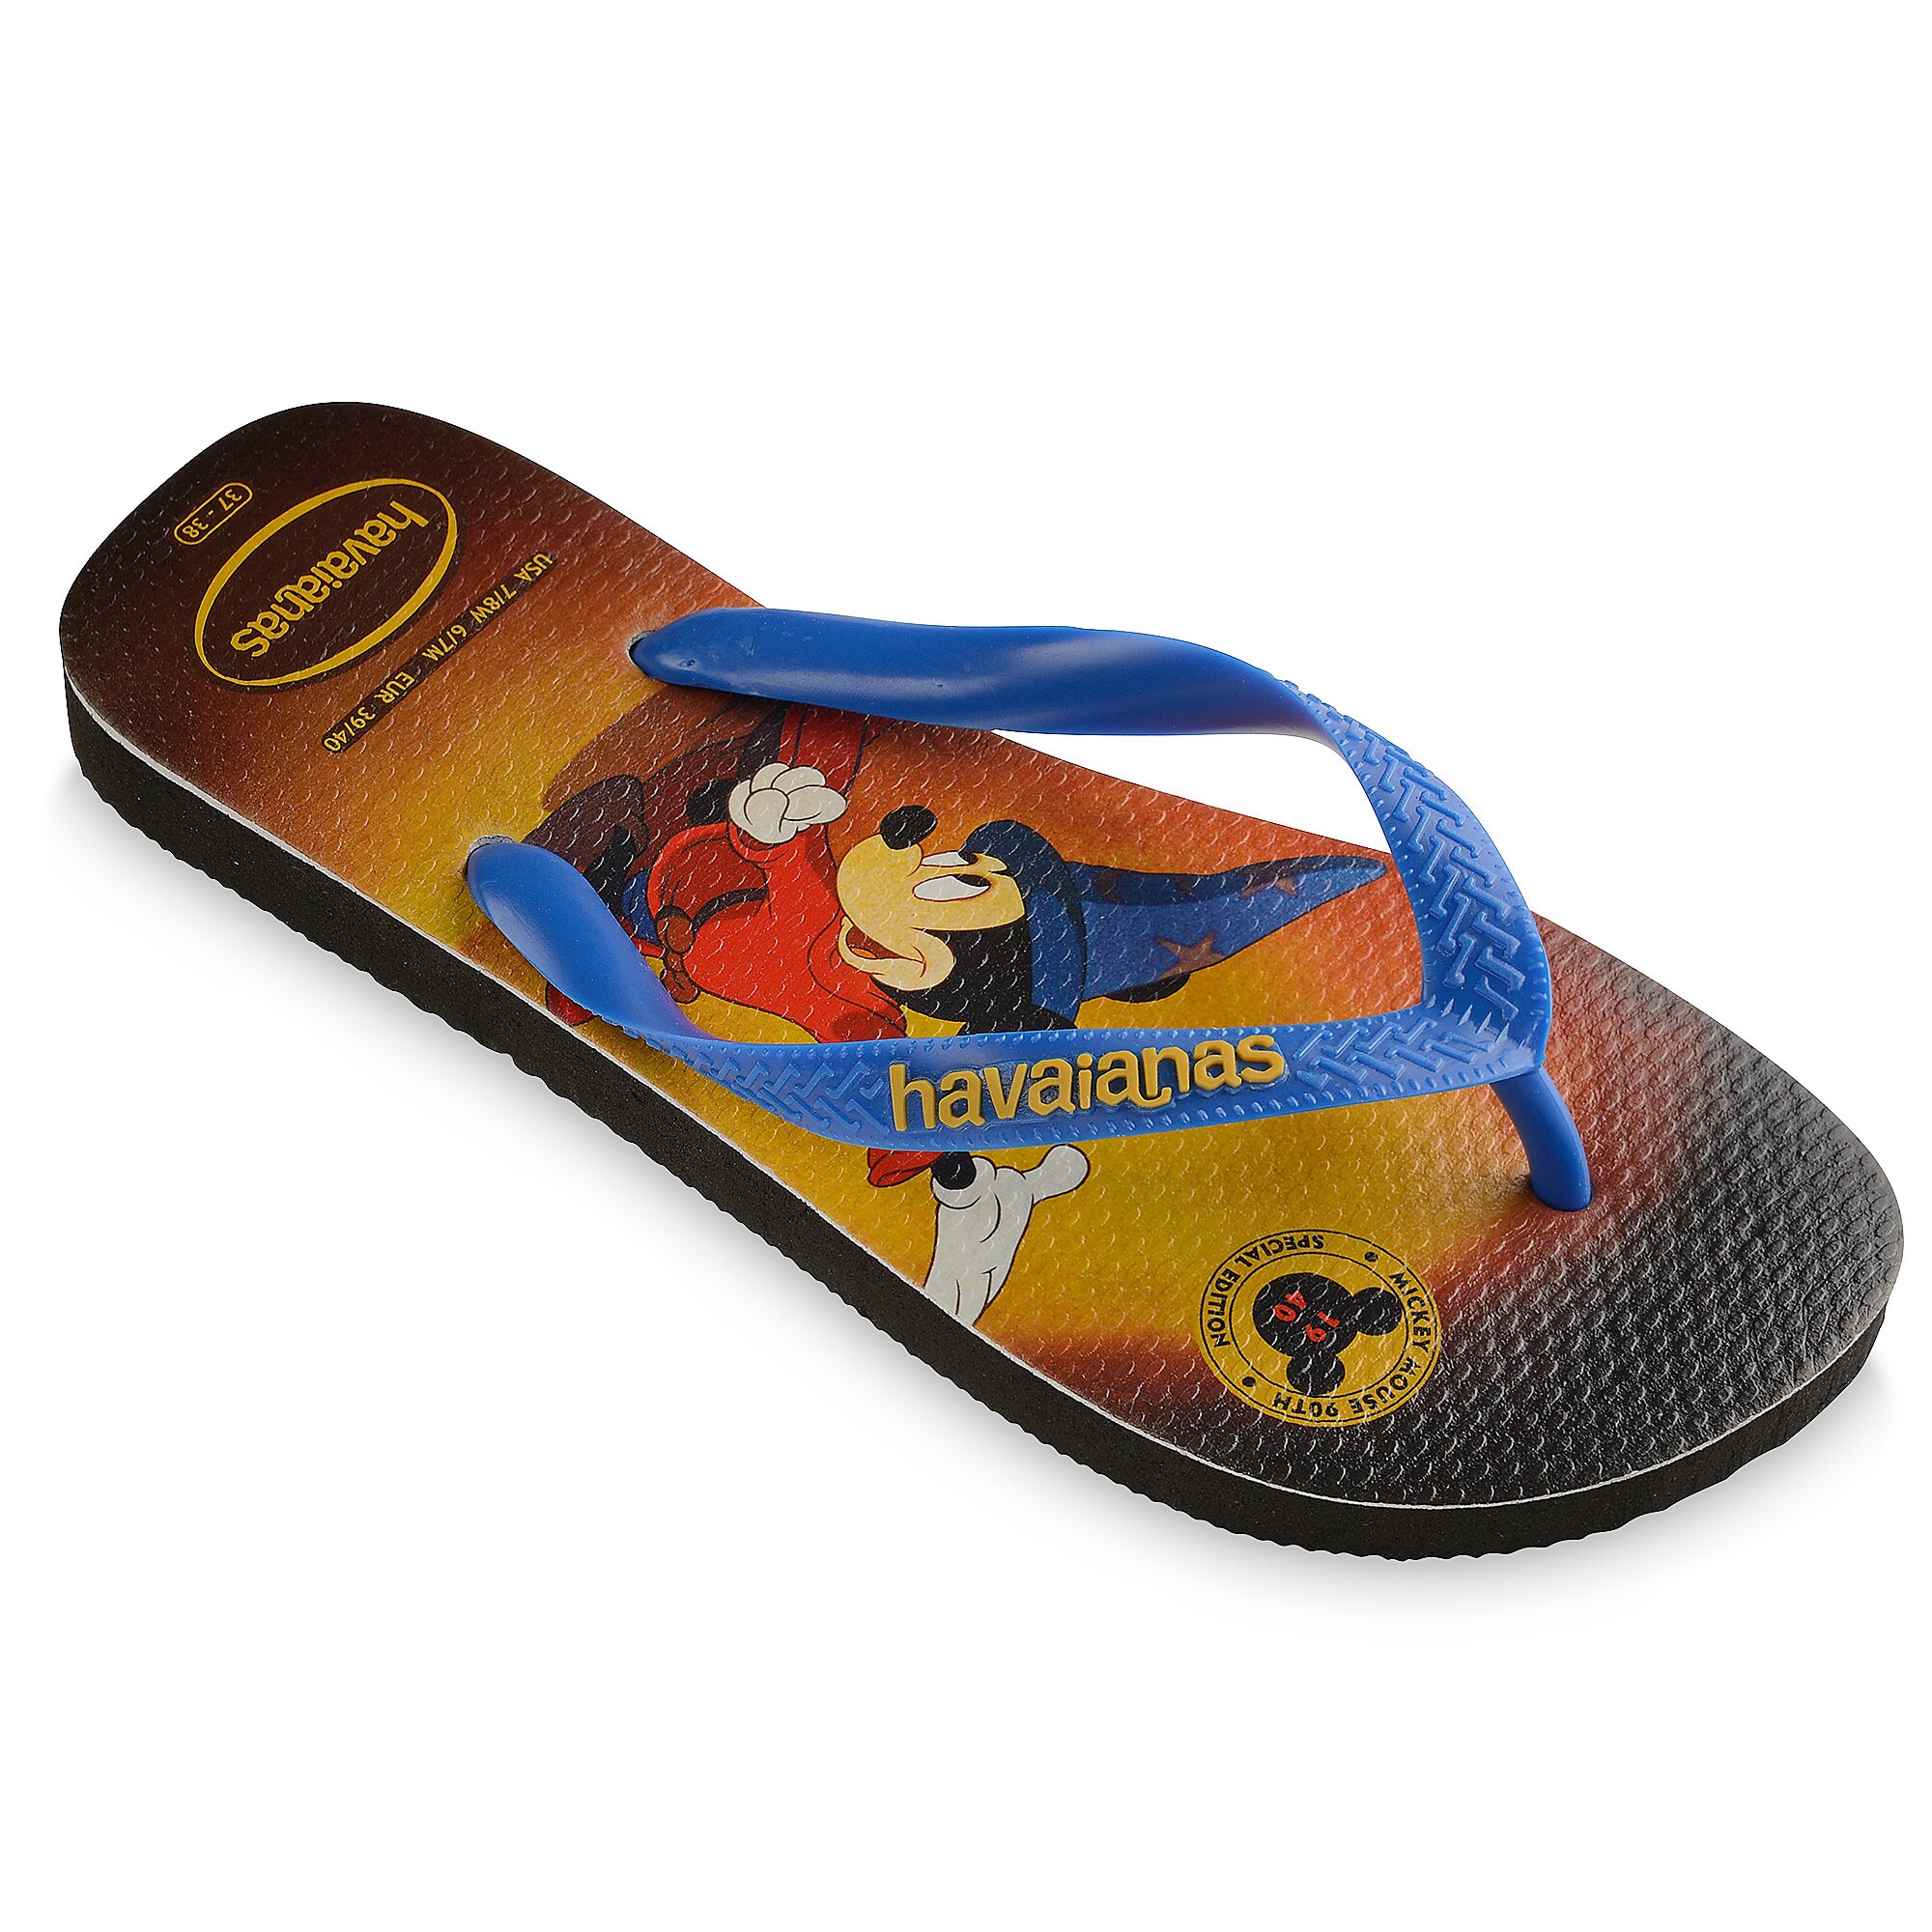 Sorcerer Mickey Mouse Flip Flops for Adults by Havaianas - 1940s